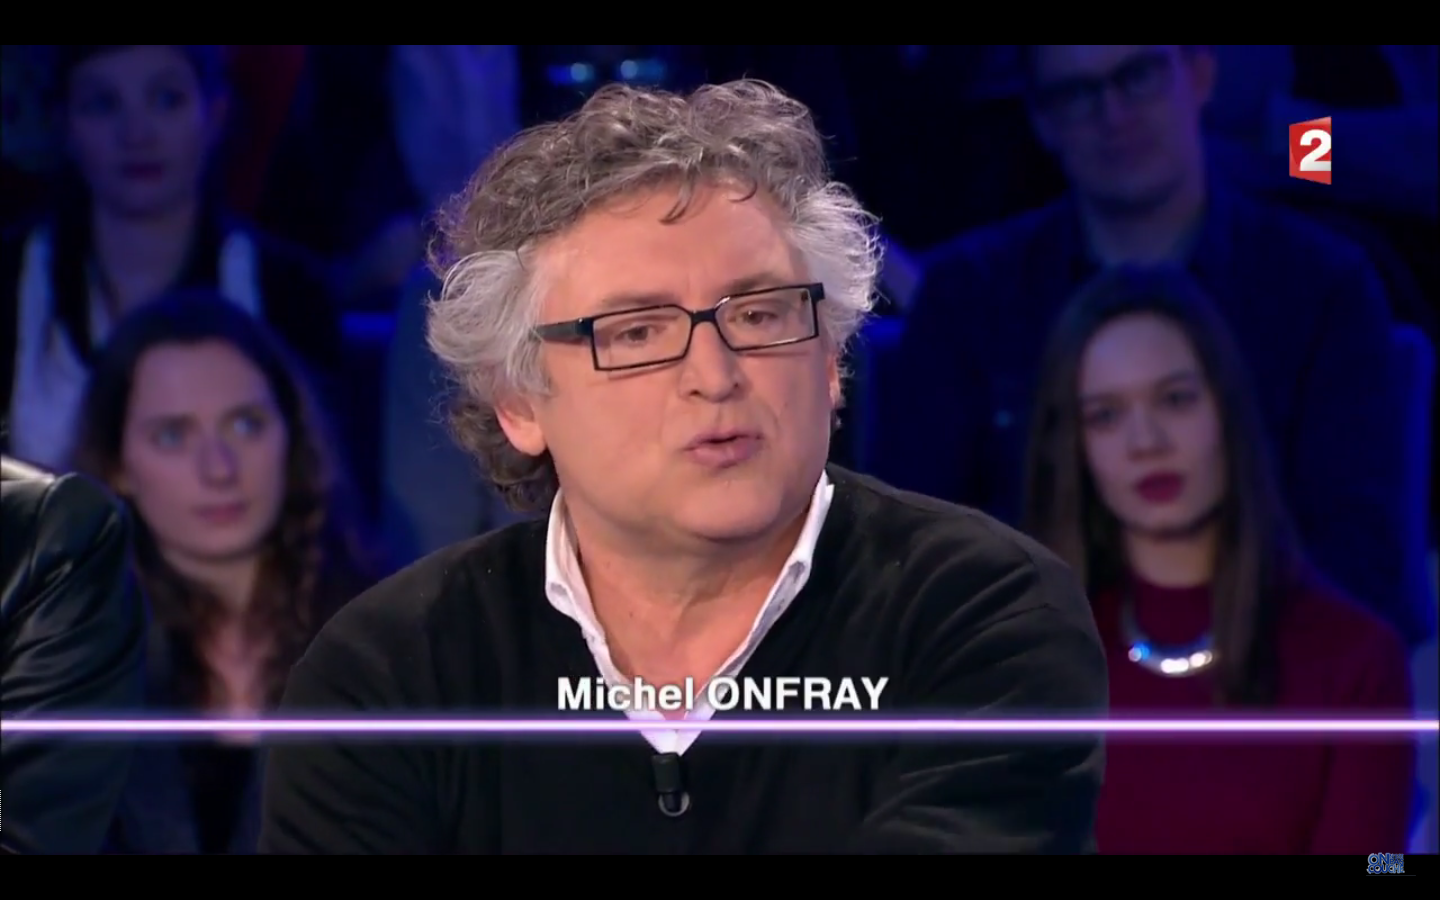 Michel Onfray - On n'est pas couché (ONPC - France 2) - 11.02.2017 -  "Décadence" - Michel Onfray